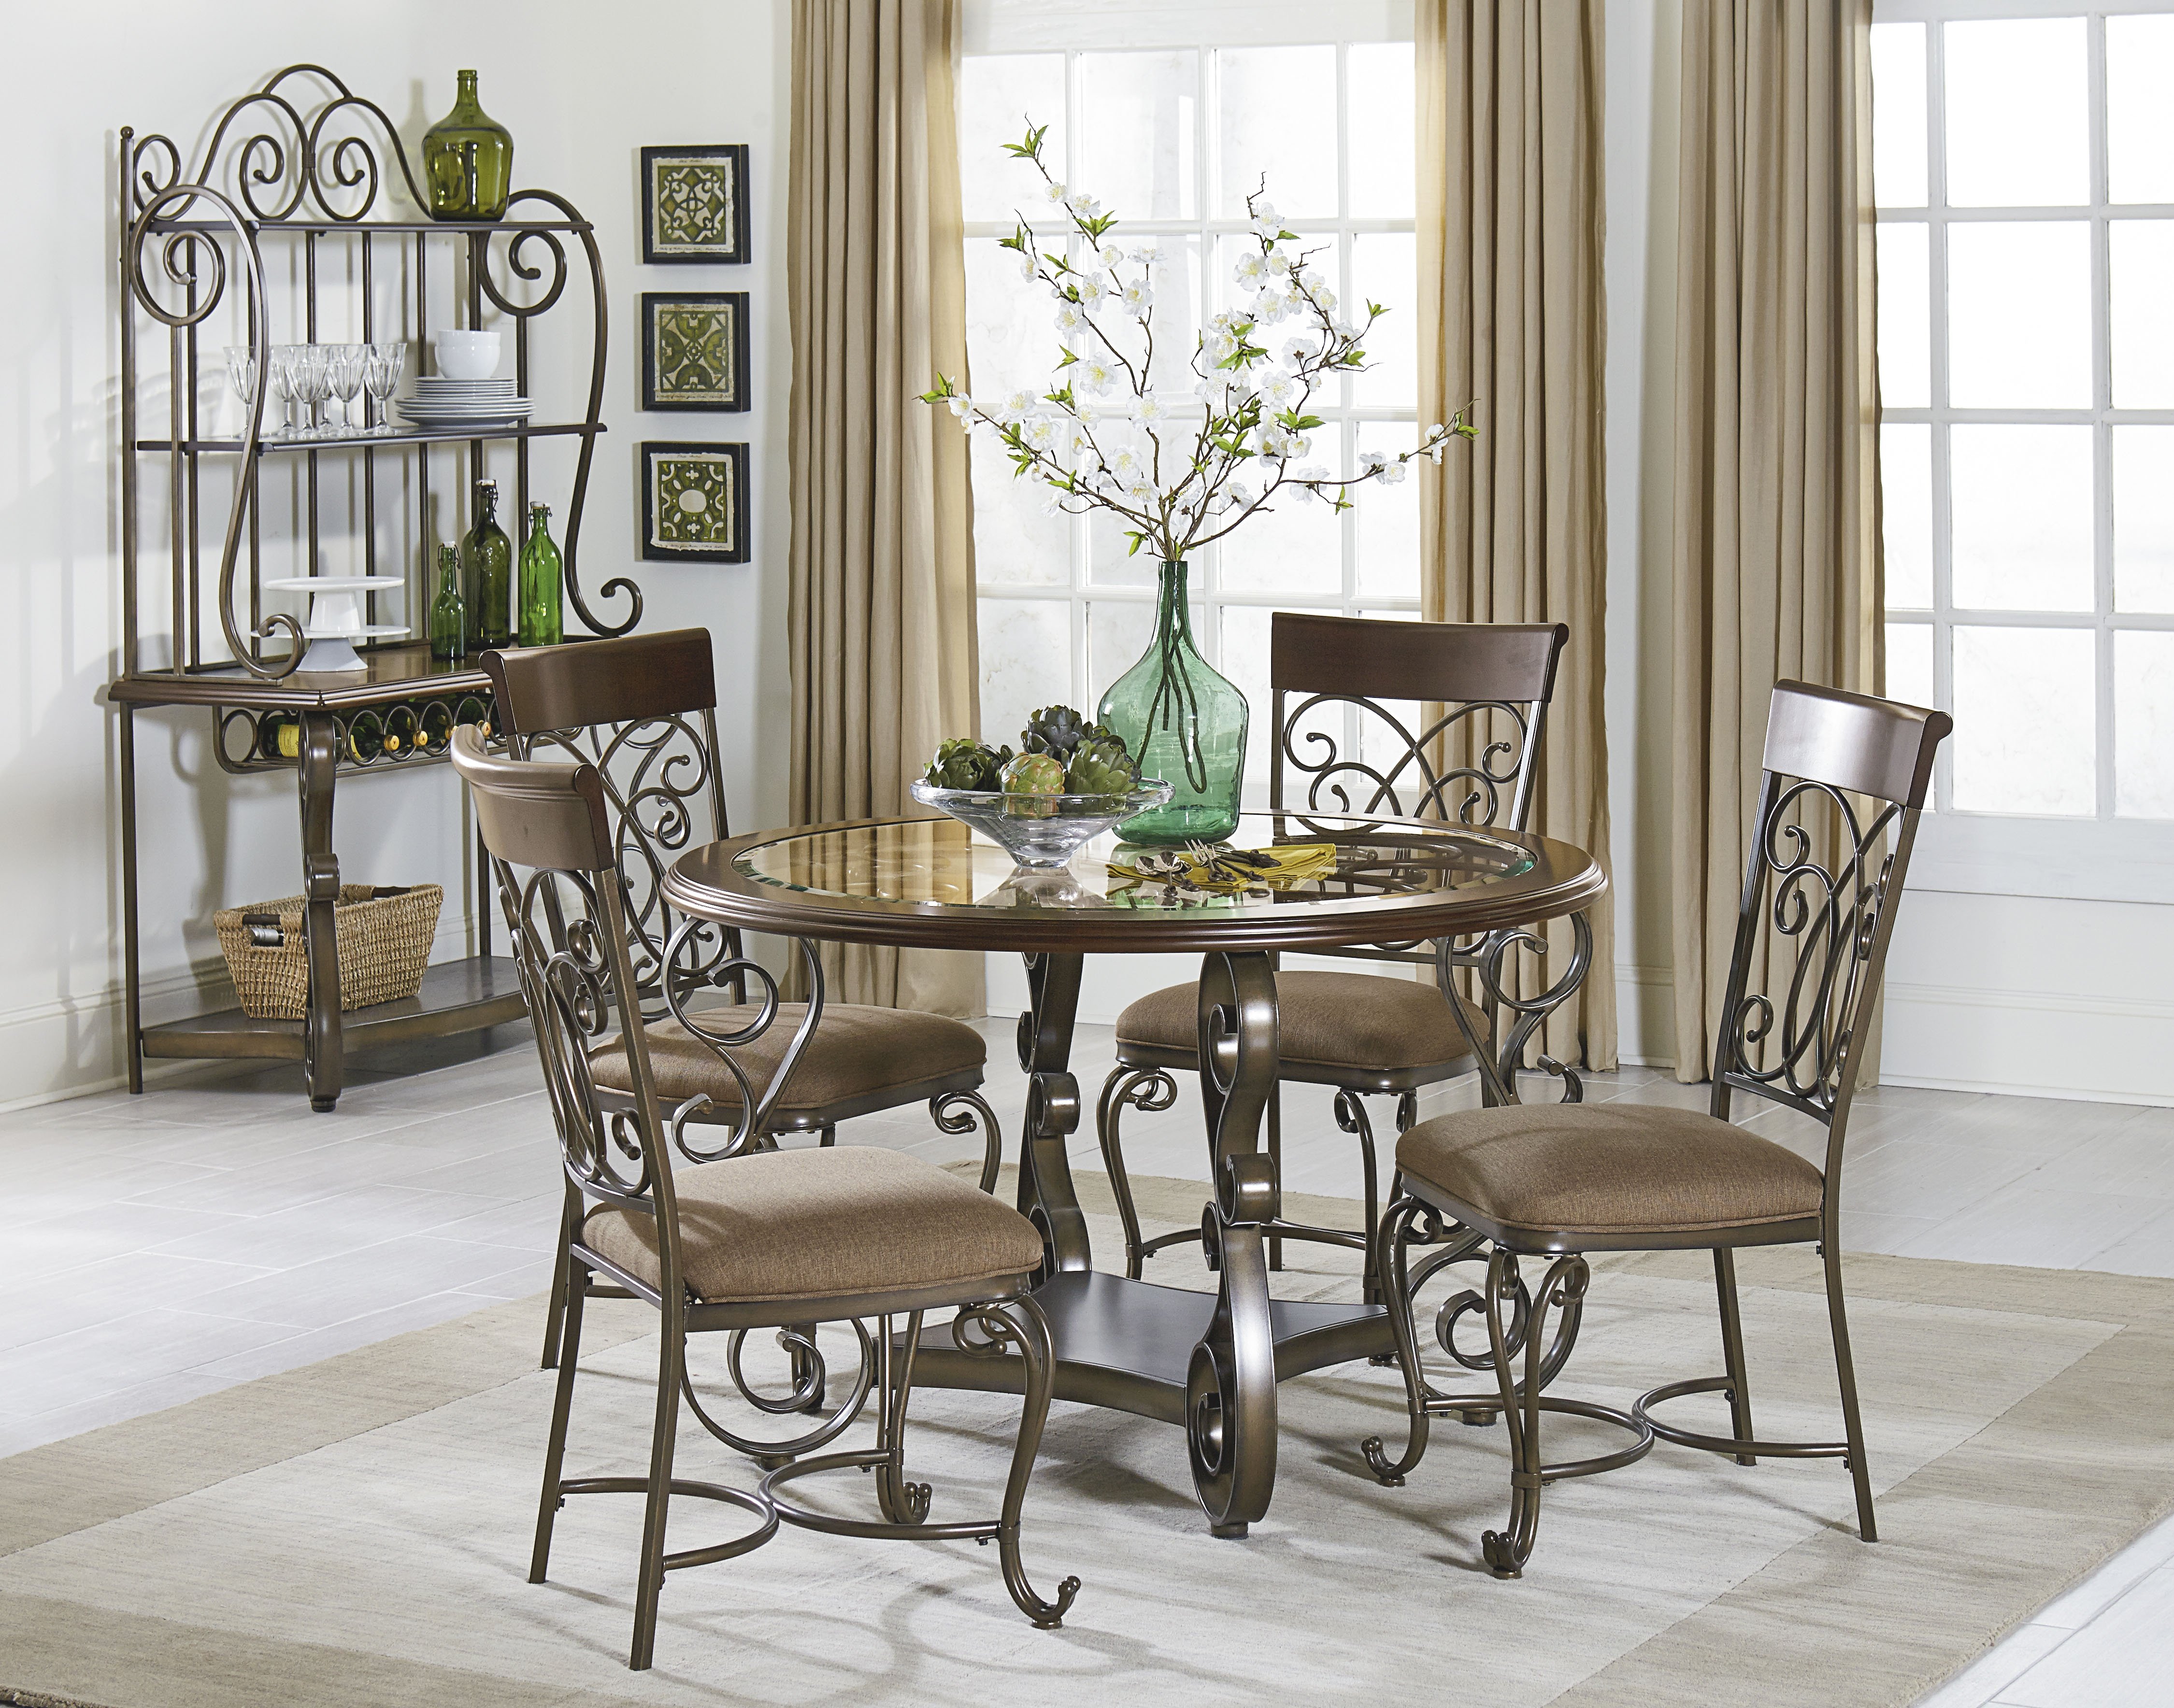 Bombay Counter Height Dining Set
P.O : 13420